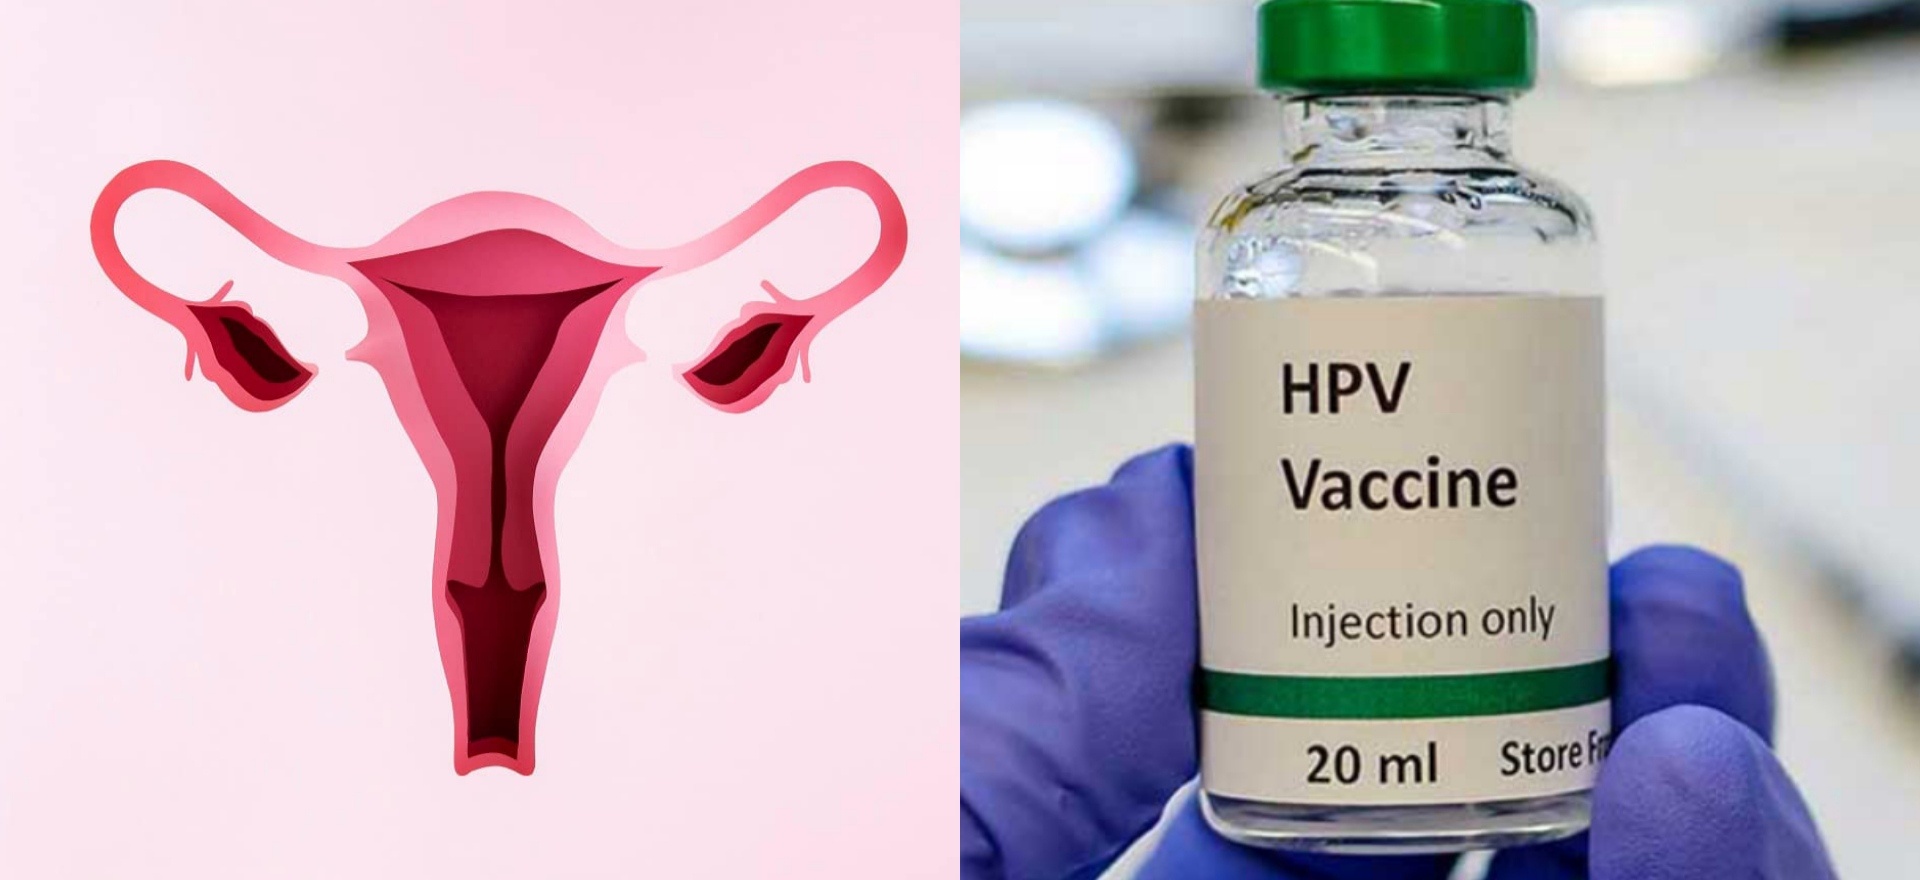 Serum Institute to launch India's first indigenous cervical cancer vaccine  - The News Insight